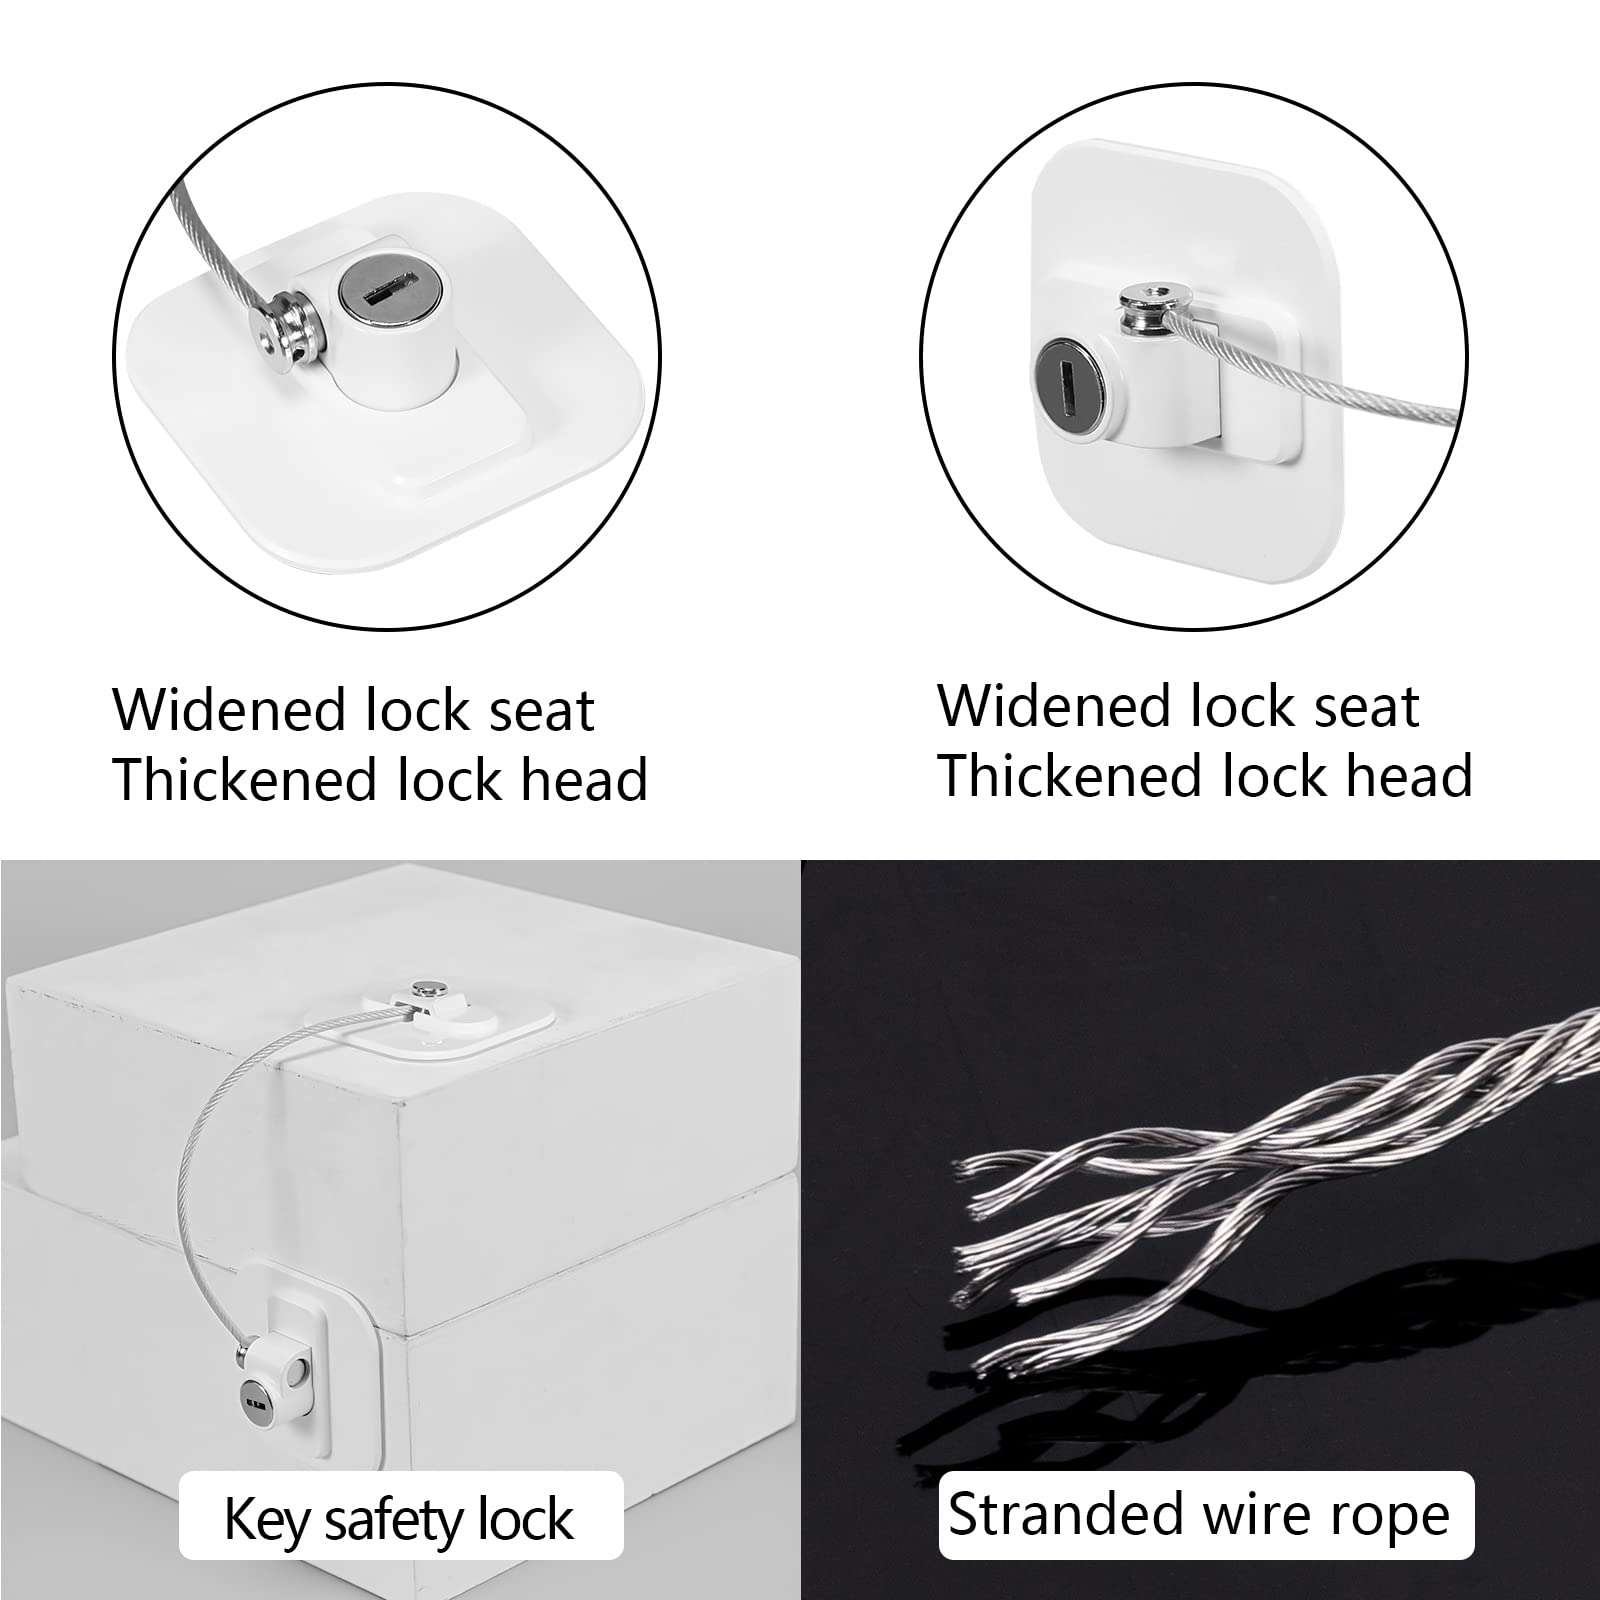 PTLOCKMY Protects Locks from Children's Window Accidents and cabinets, Fridge Doors Being Opened, Fridge Lock Strong Adhesive (Fridge Lock - White 1Pack)